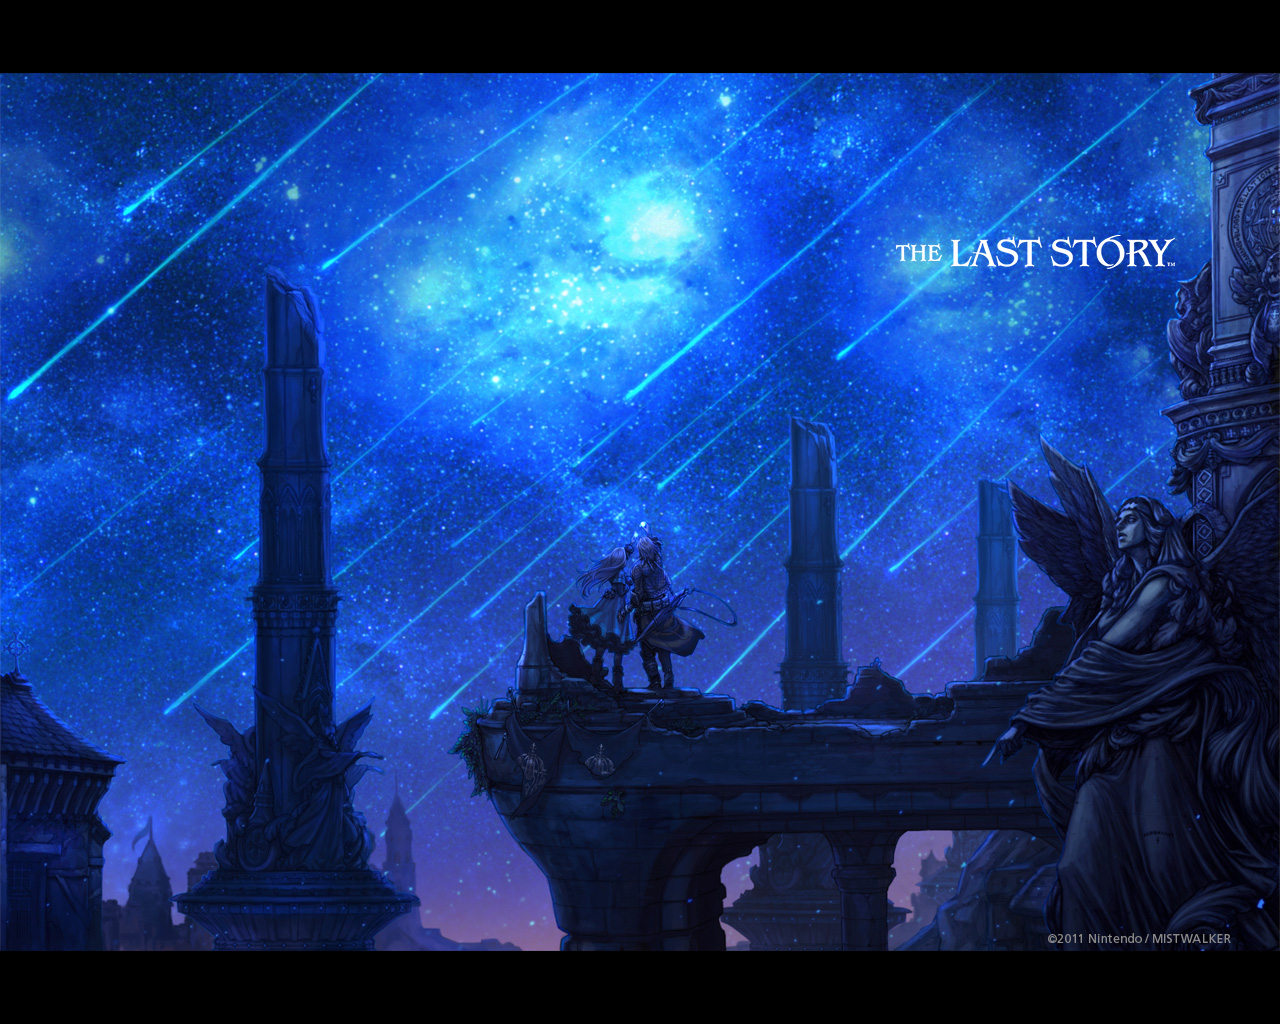 The Last Story Fiche RPG reviews previews wallpapers videos